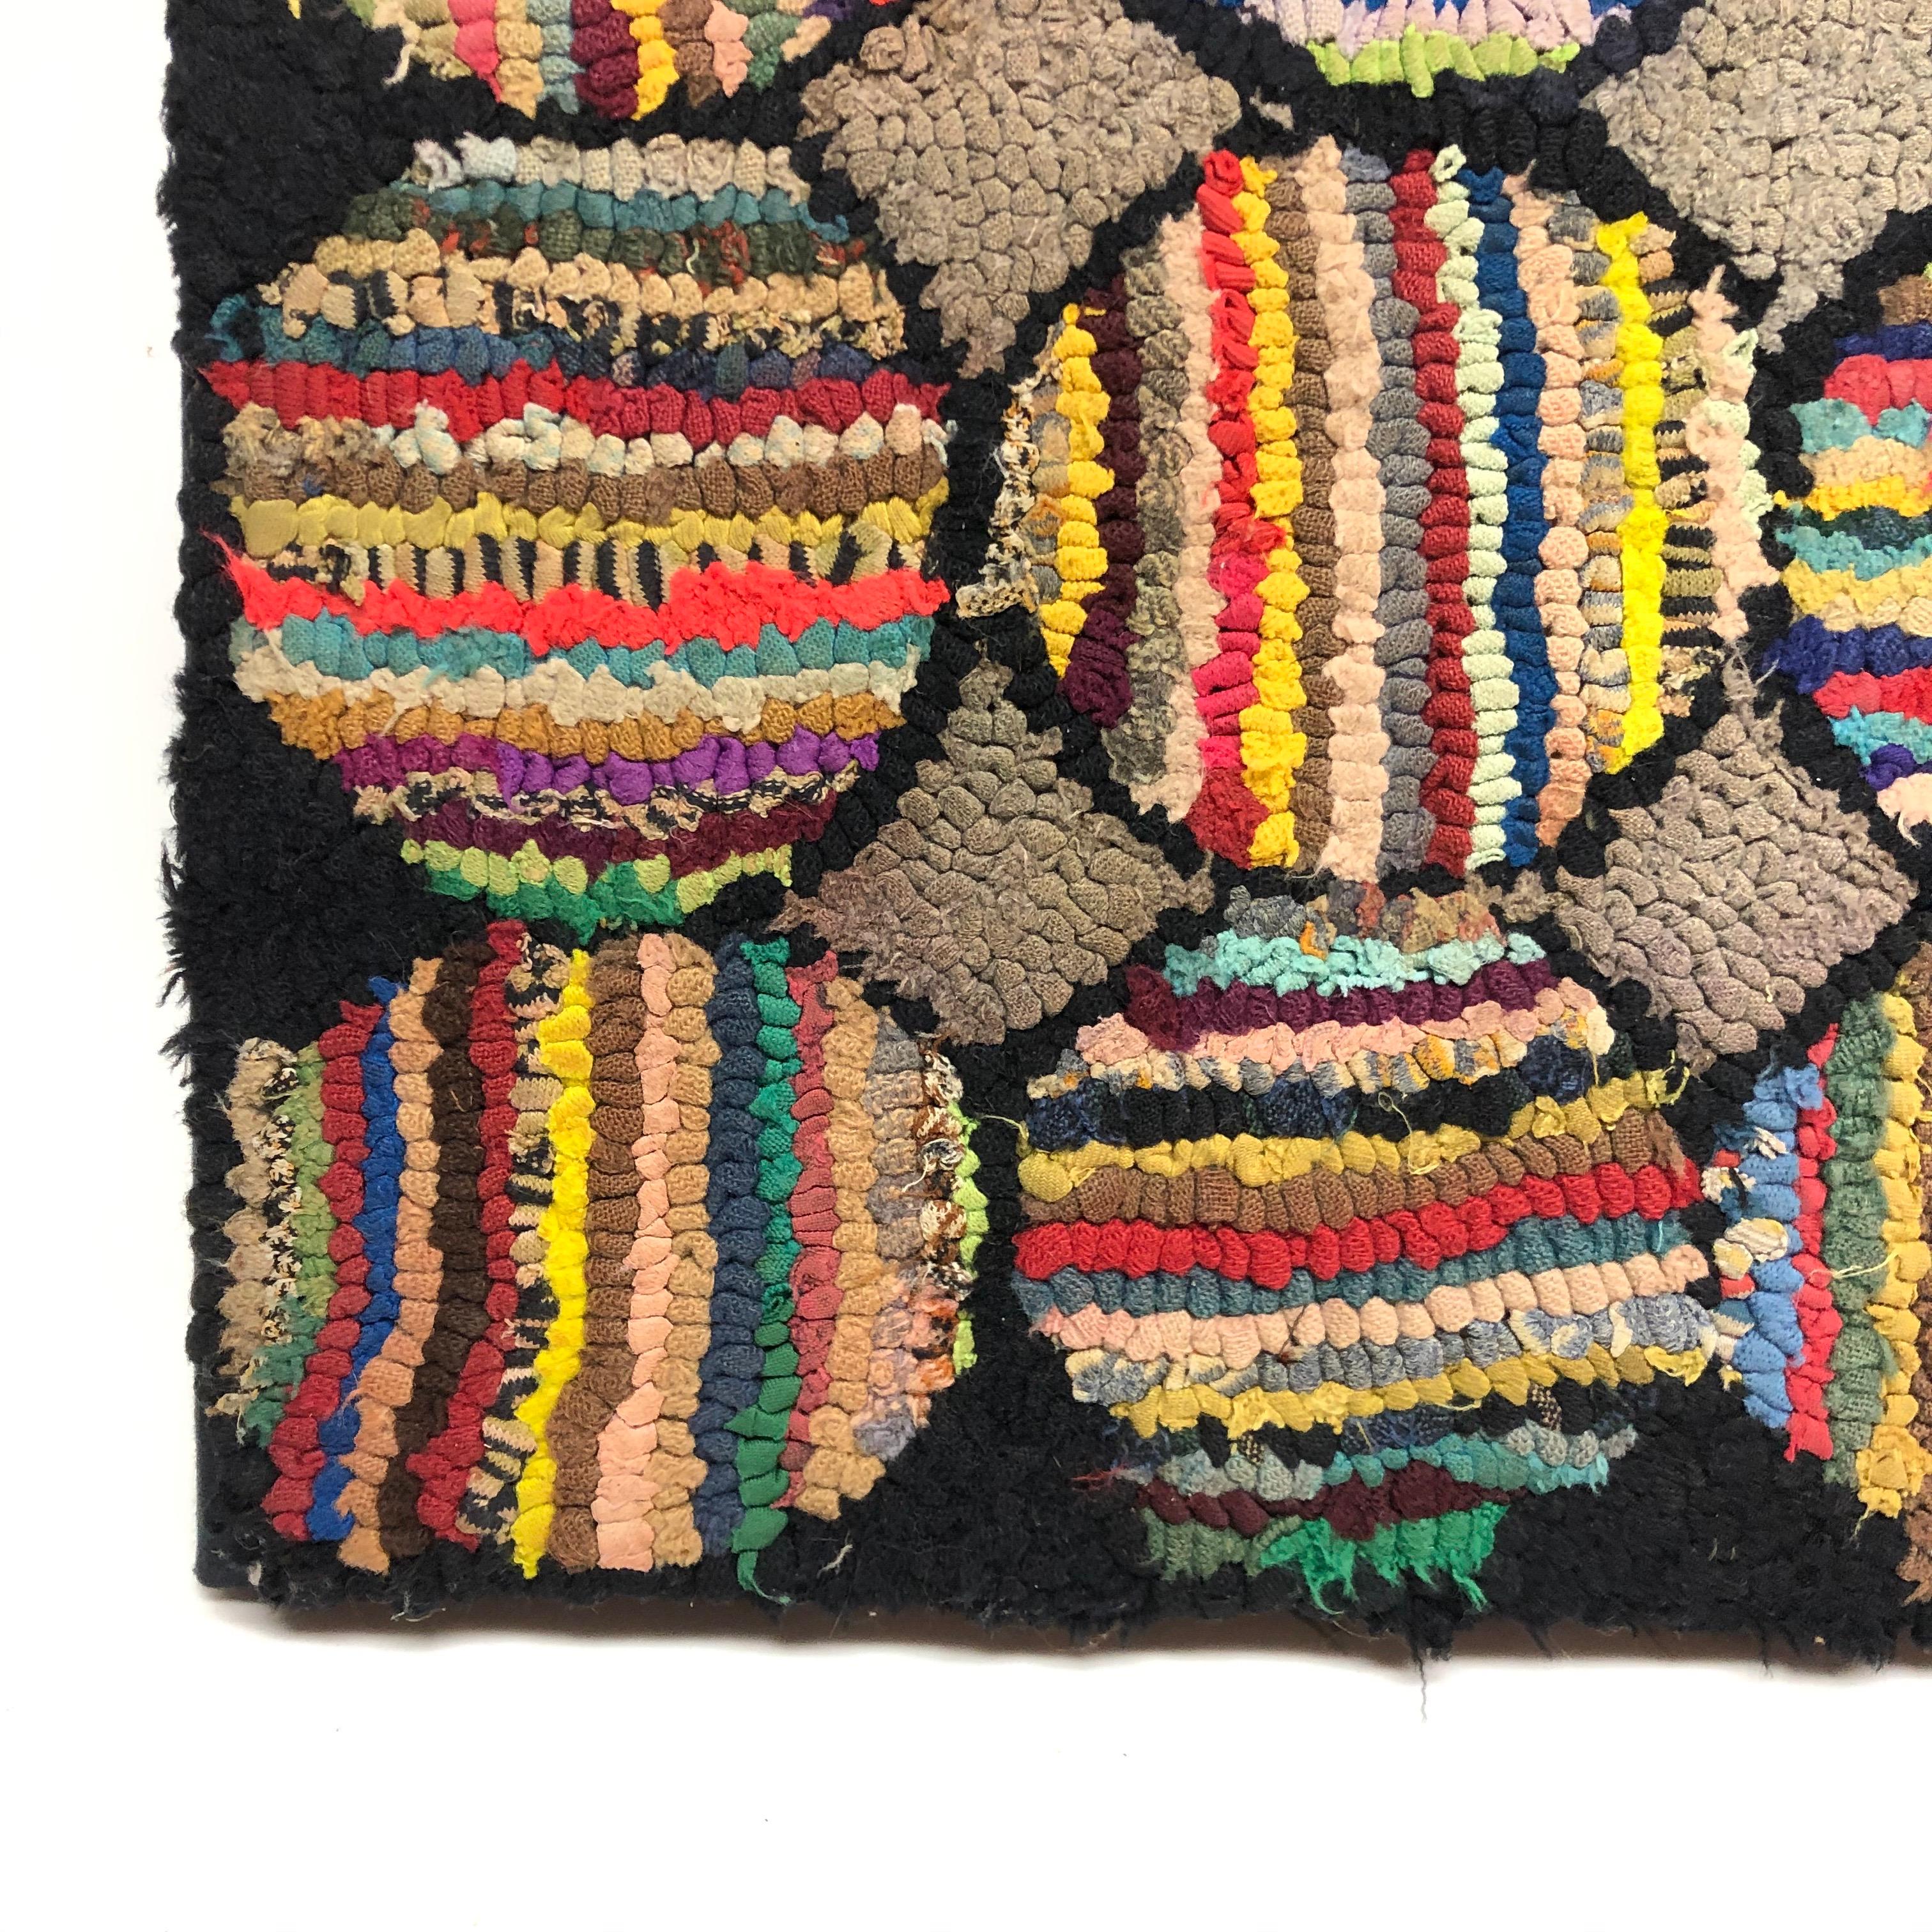 Folk Art hook rug mounted on board for wall display but could easily detach for floor use. Unusual pattern feels modern.